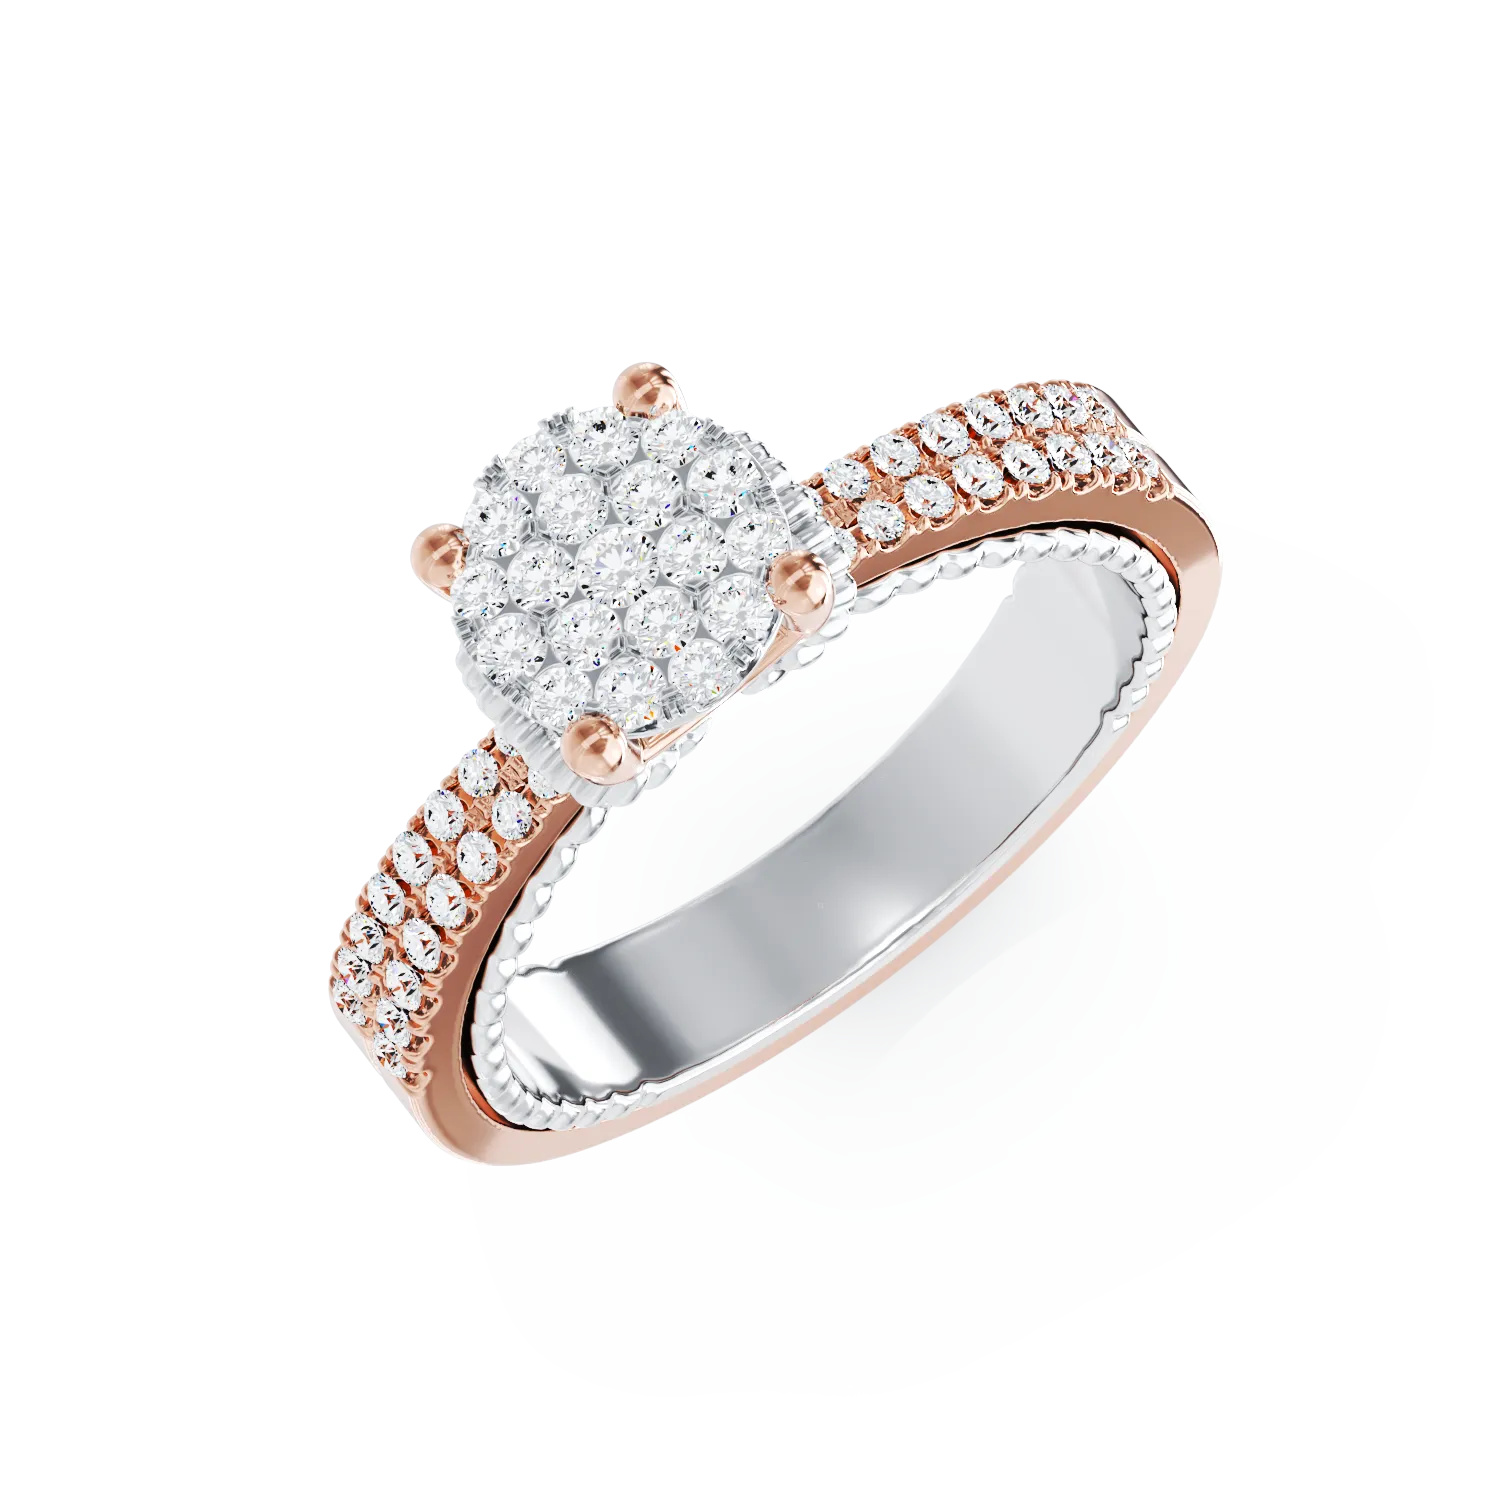 18K white-rose gold engagement ring with 0.44ct diamonds